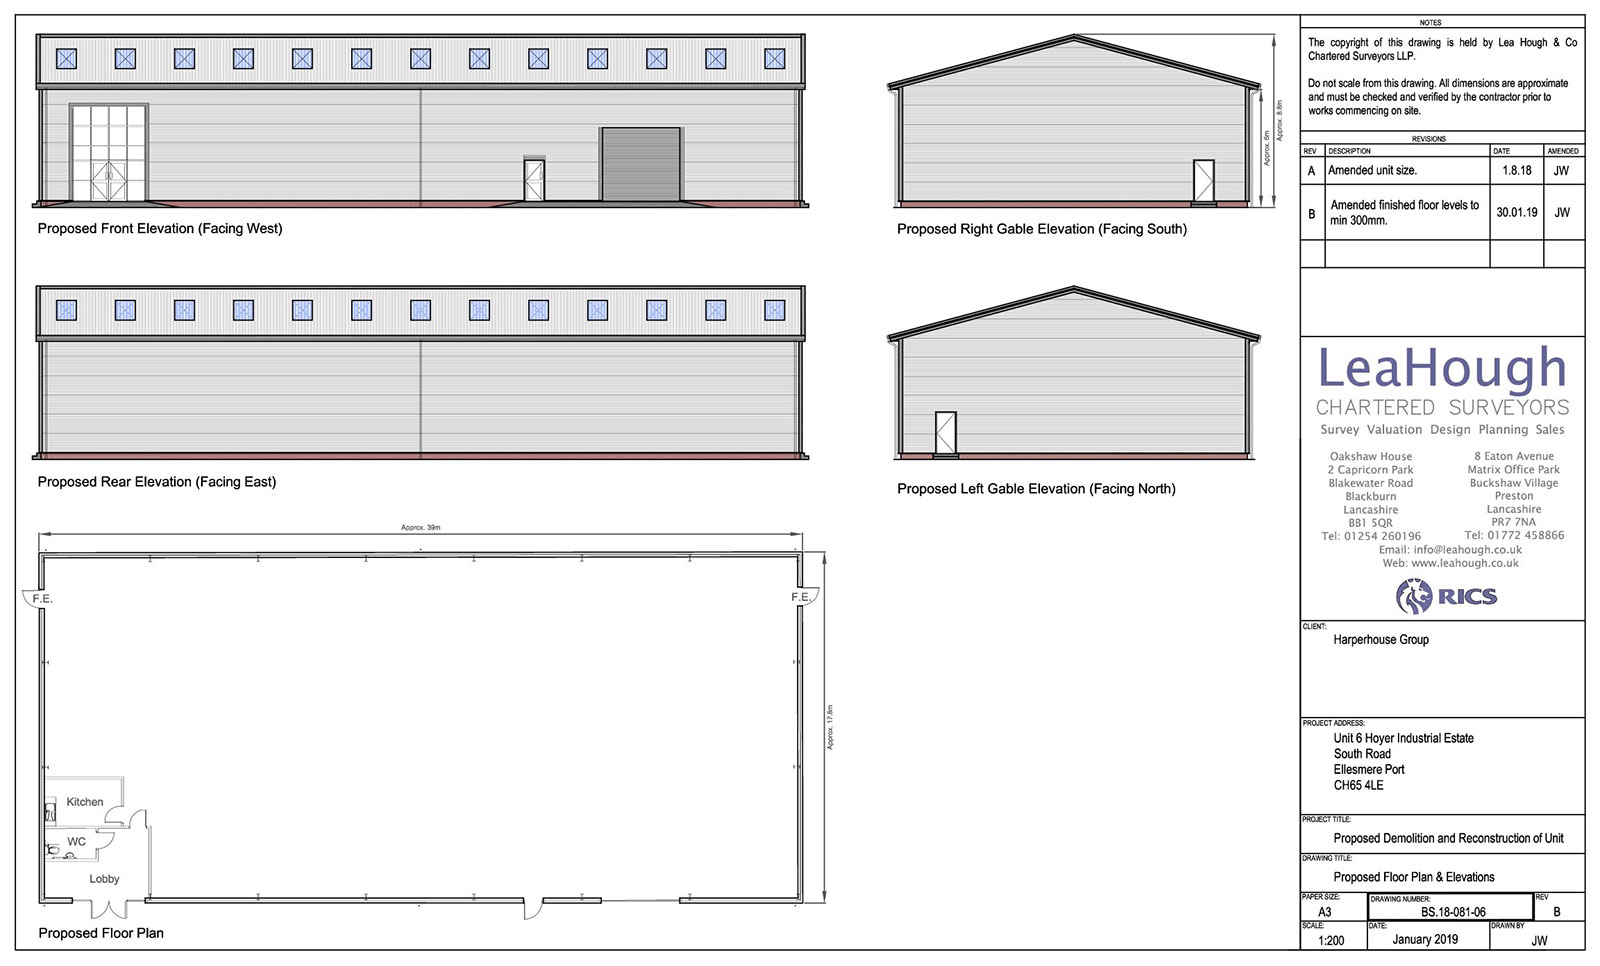 Planning Approval Industrial Unit